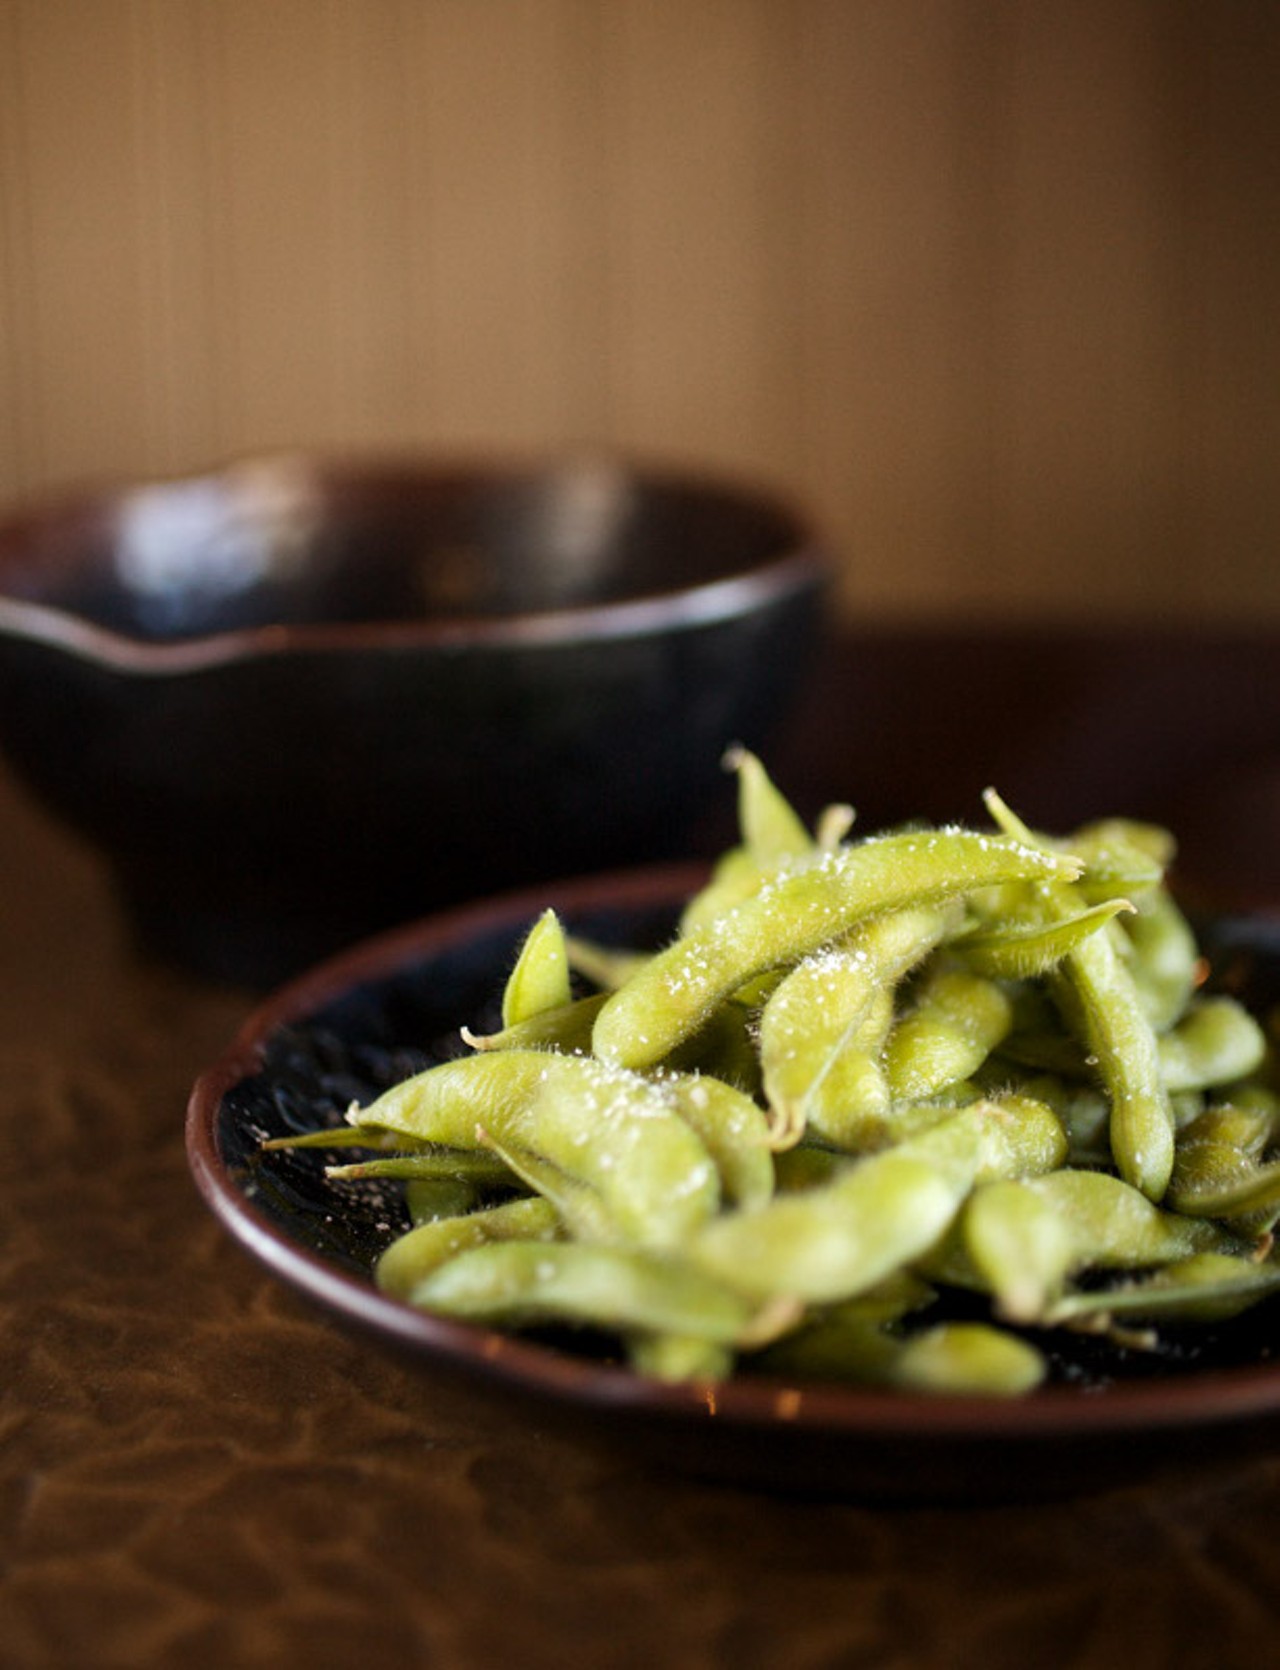 Edamame - boiled, salted soybeans.